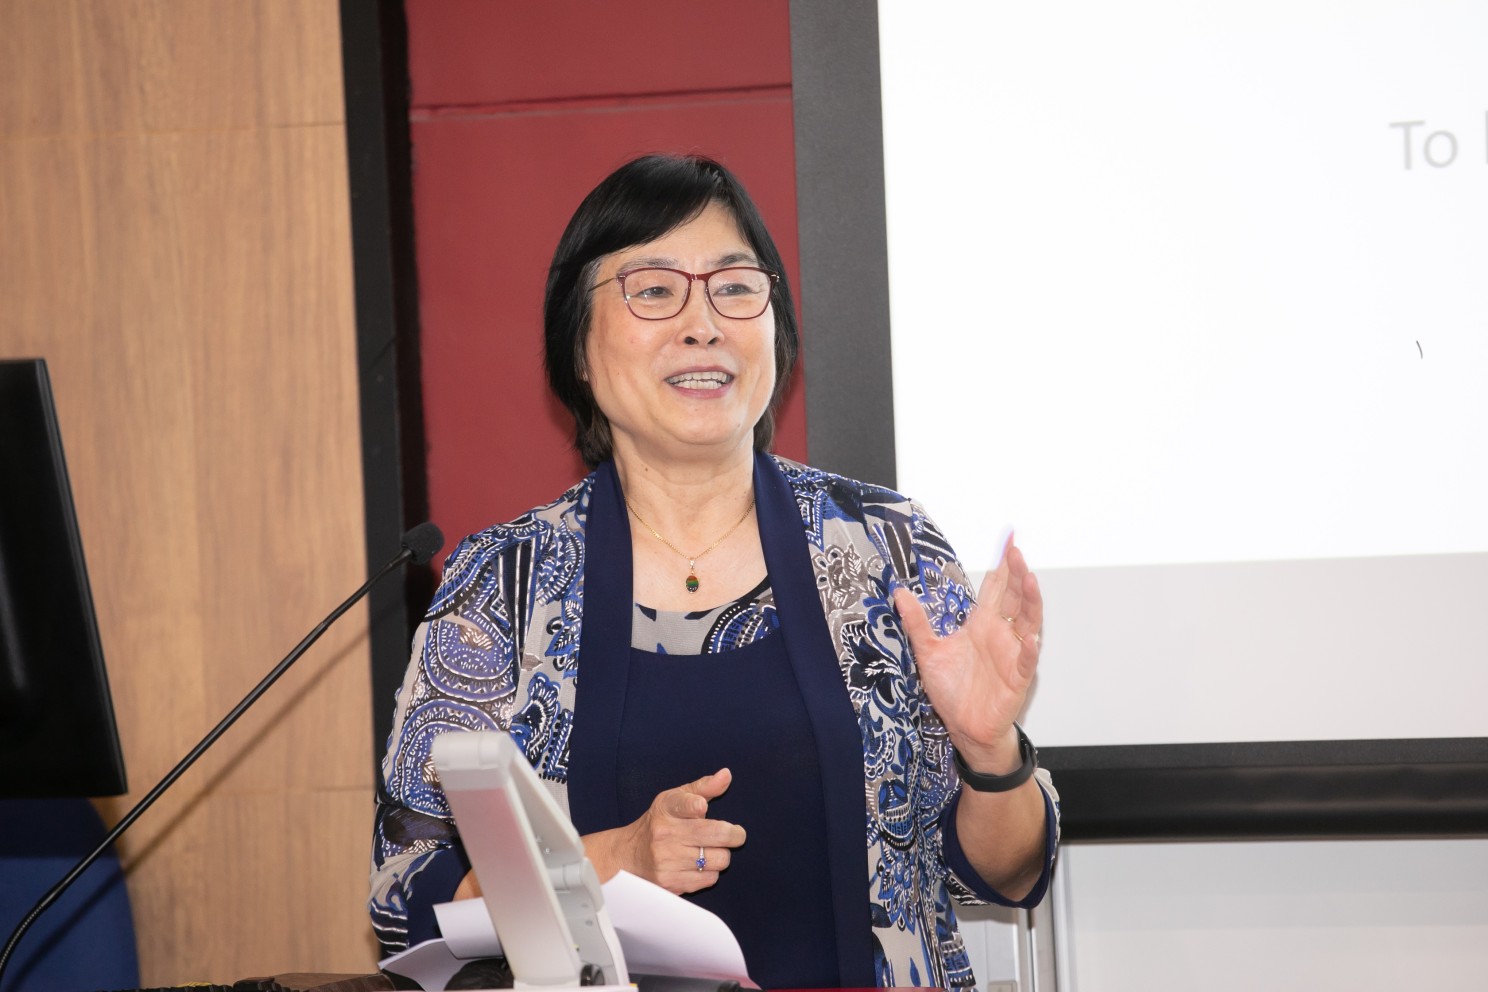 Among the first cohort of Lingnan Fellows, Prof Zhou Min is an elected member of the National Academy of Sciences and the American Academy of Arts and Sciences, and a Distinguished Professor of Sociology and Asian American Studies and Walter and Shirley Wang Endowed Chair in US-China Relations and Communications at the University of California, Los Angeles.